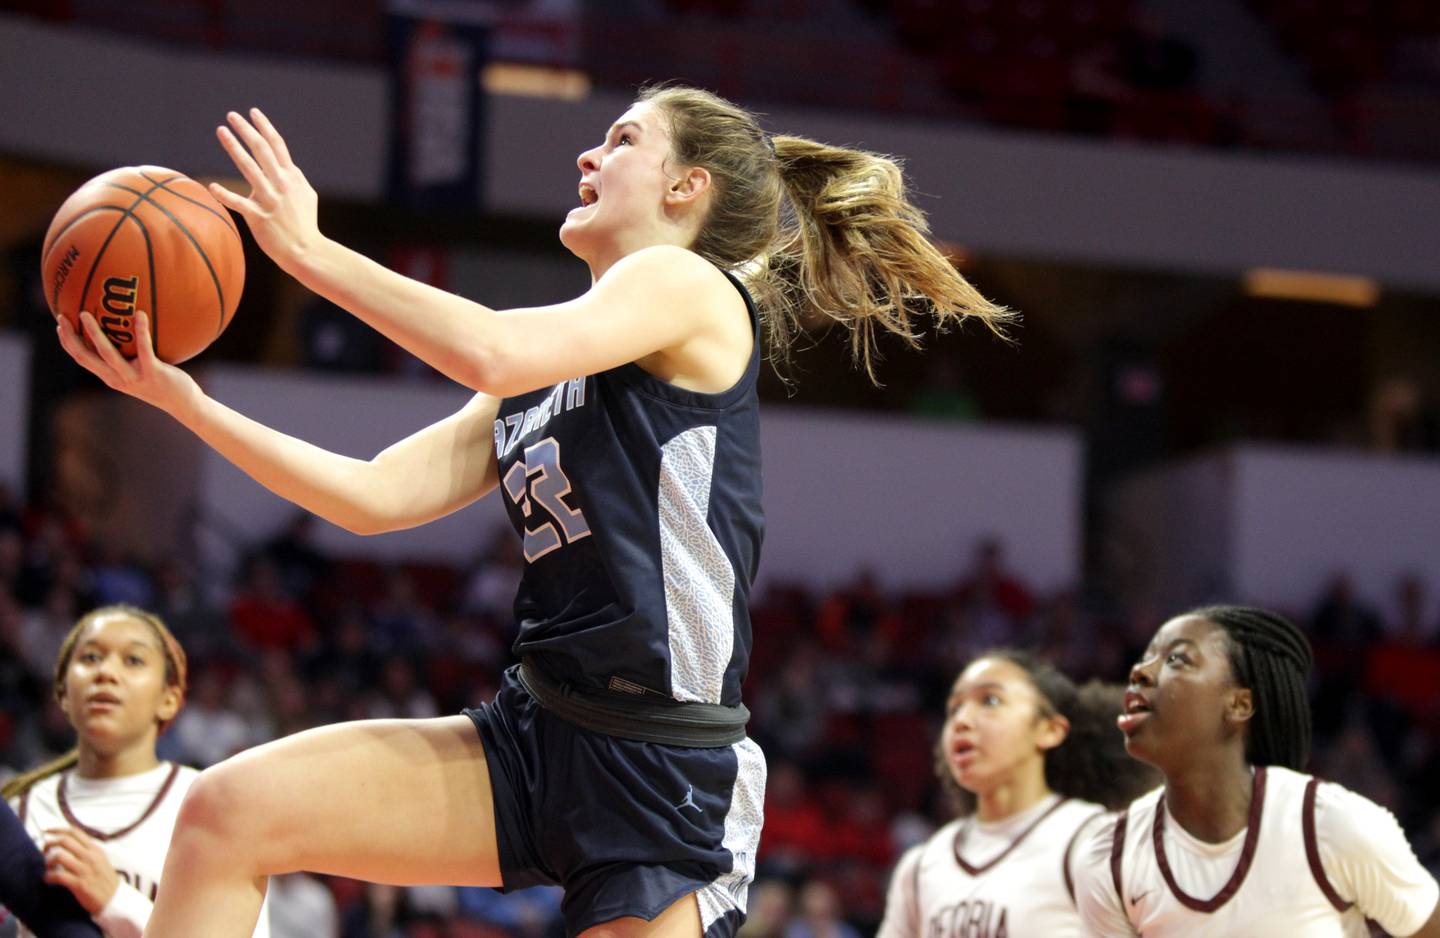 Nazareth Academy's Grace Carstensen goes up for a shot during the Class 3A girls basketball state semifinal against Peoria at Redbird Arena in Normal on Friday, March 3, 2023.